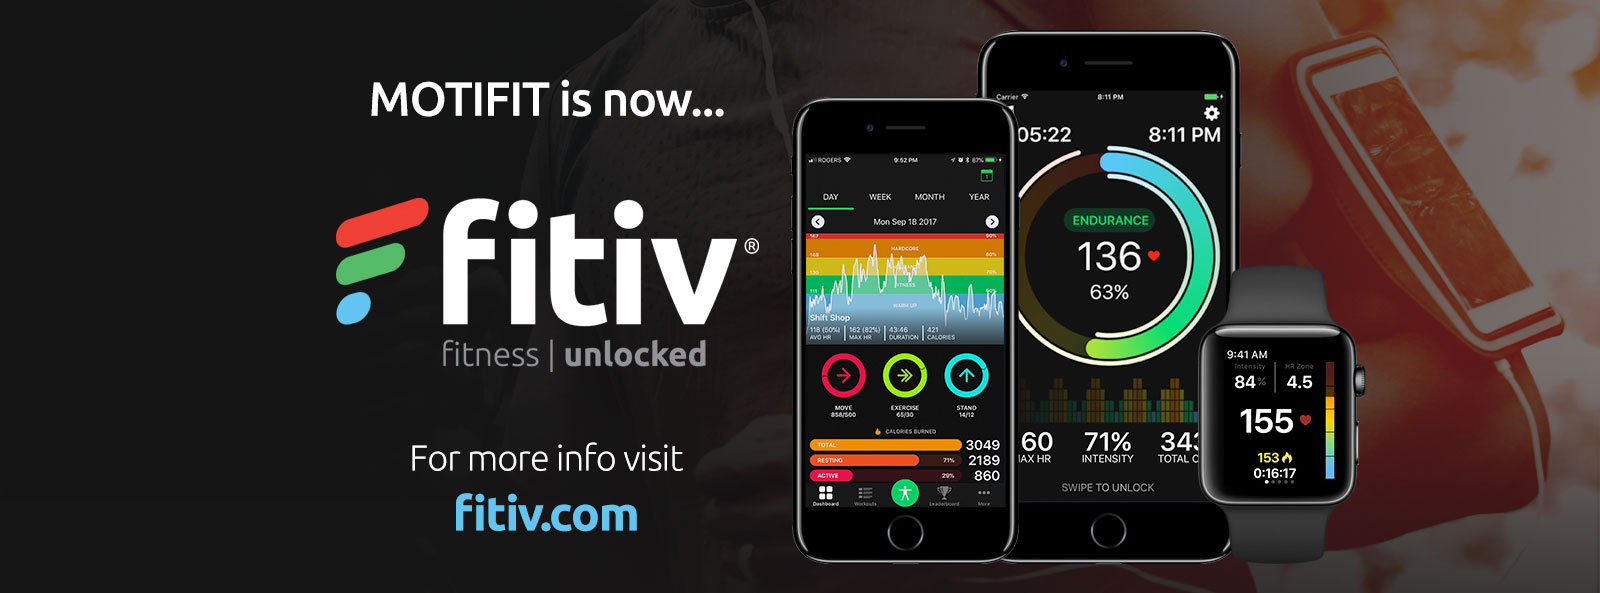 MotiFIT is now FITIV! For more info visit FITIV.com